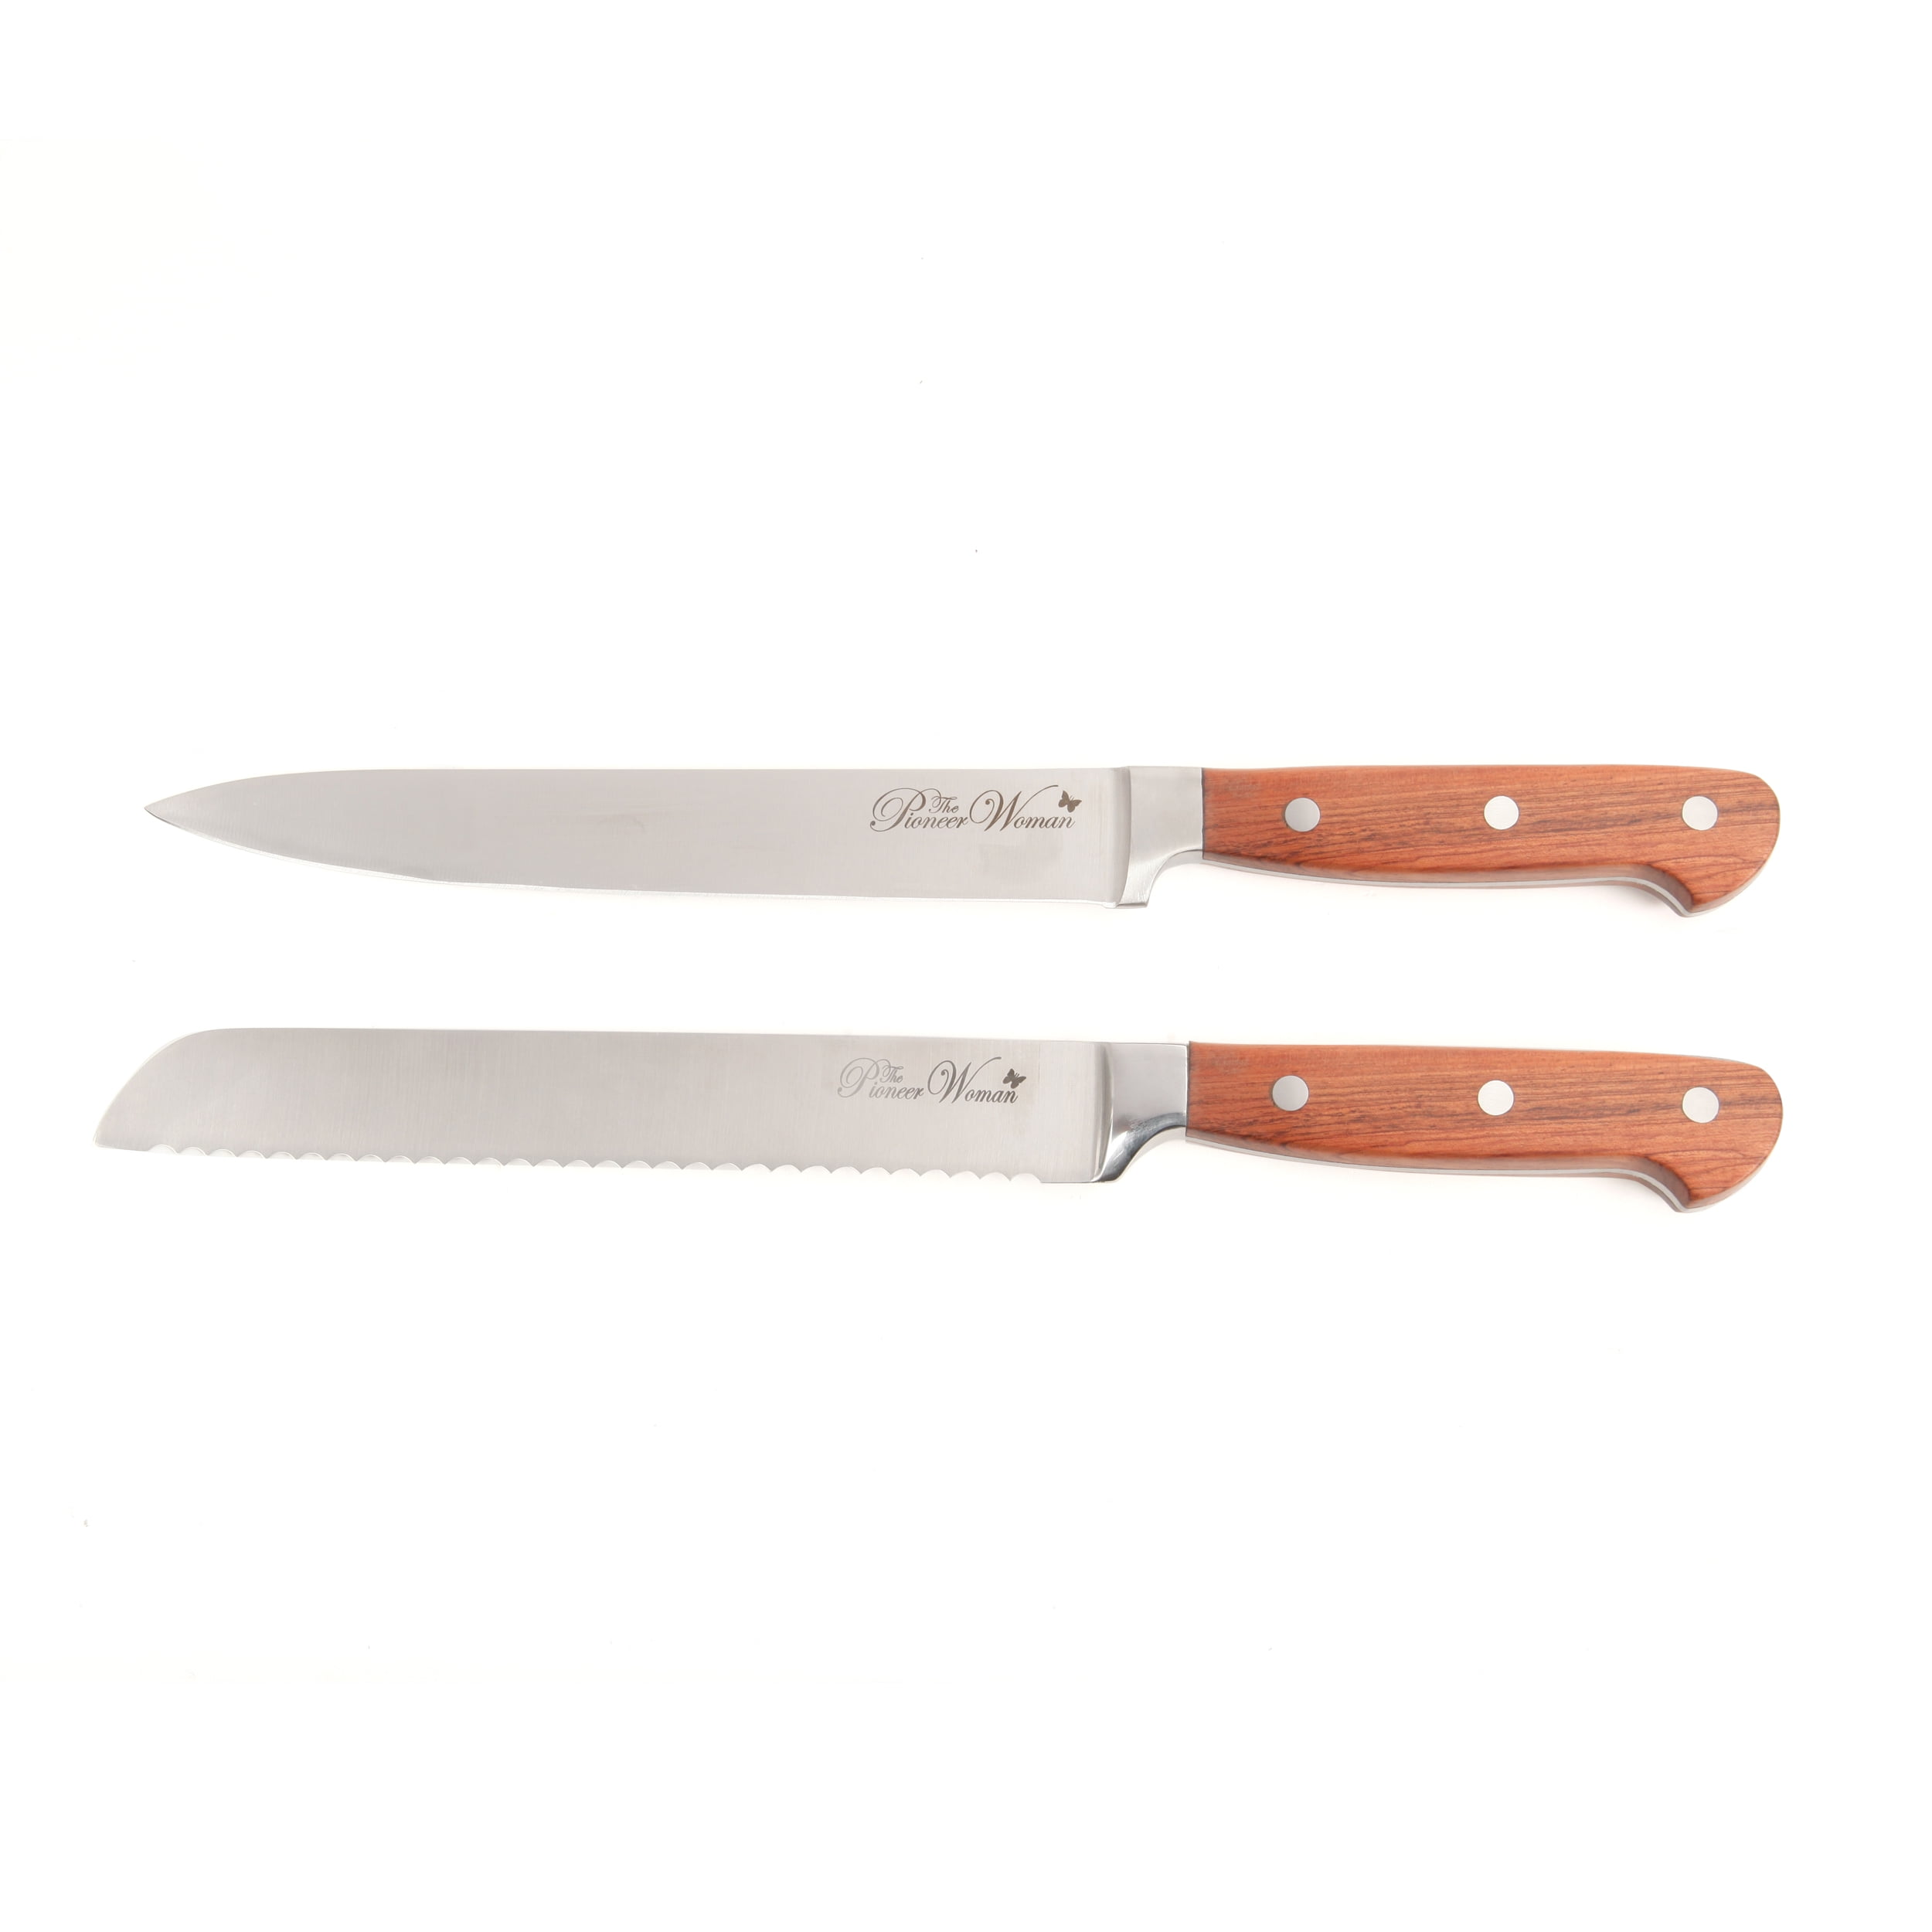 The Pioneer Woman Cowboy Rustic 14-Piece Forged Cutlery Knife